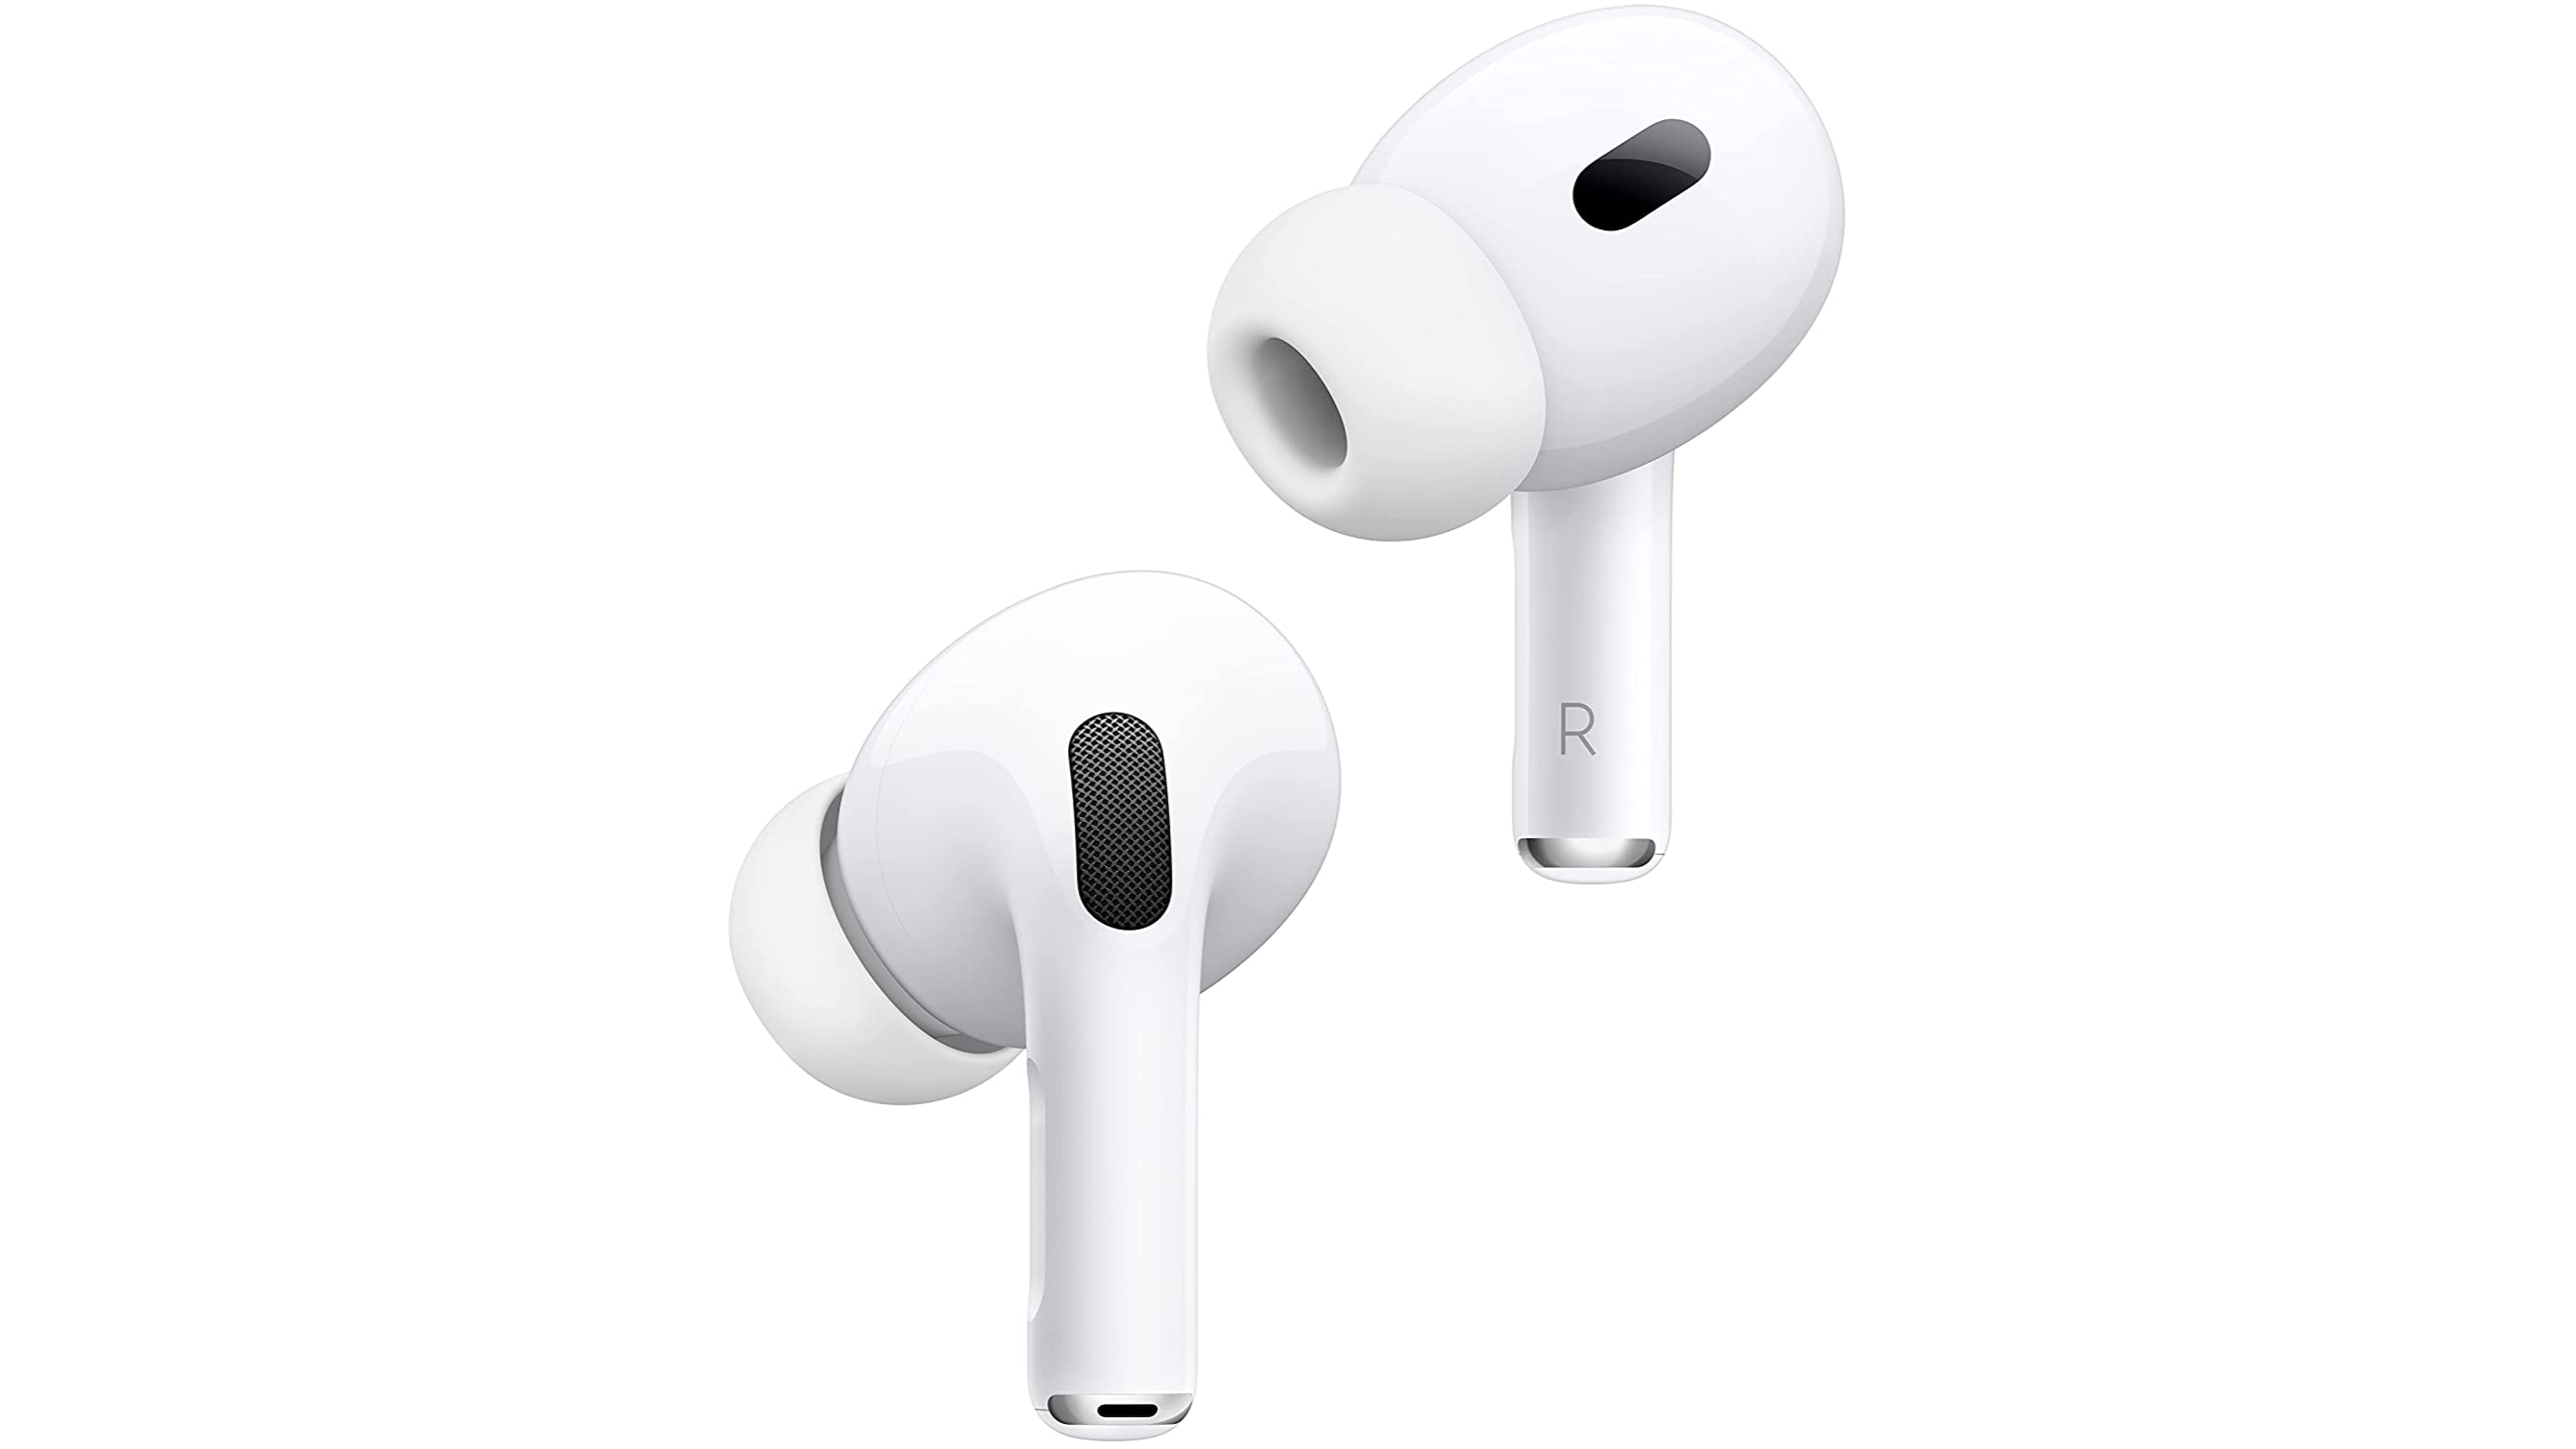 AirPods Pro 2 Black Friday deal